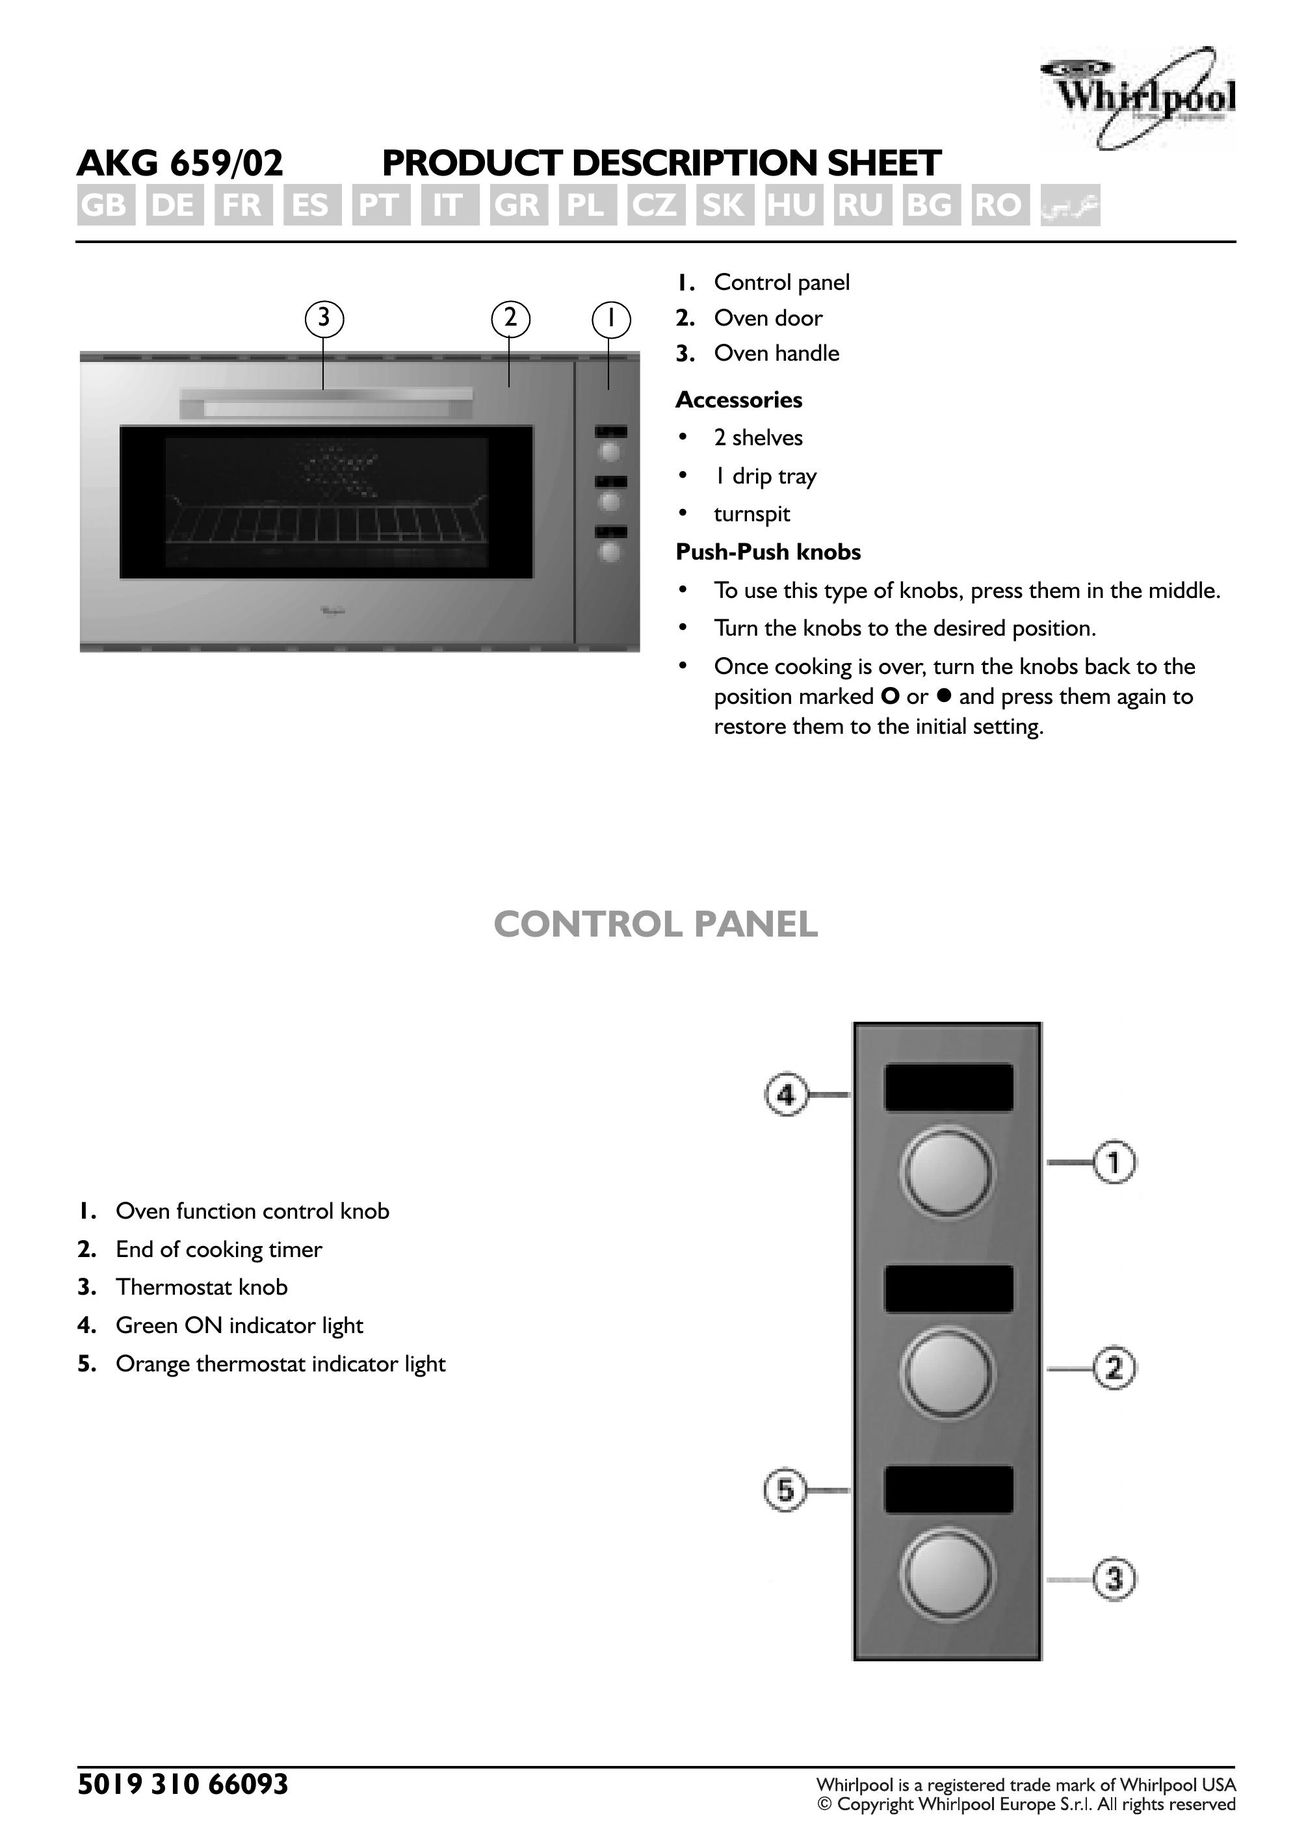 Whirlpool AKG 659/02 Convection Oven User Manual